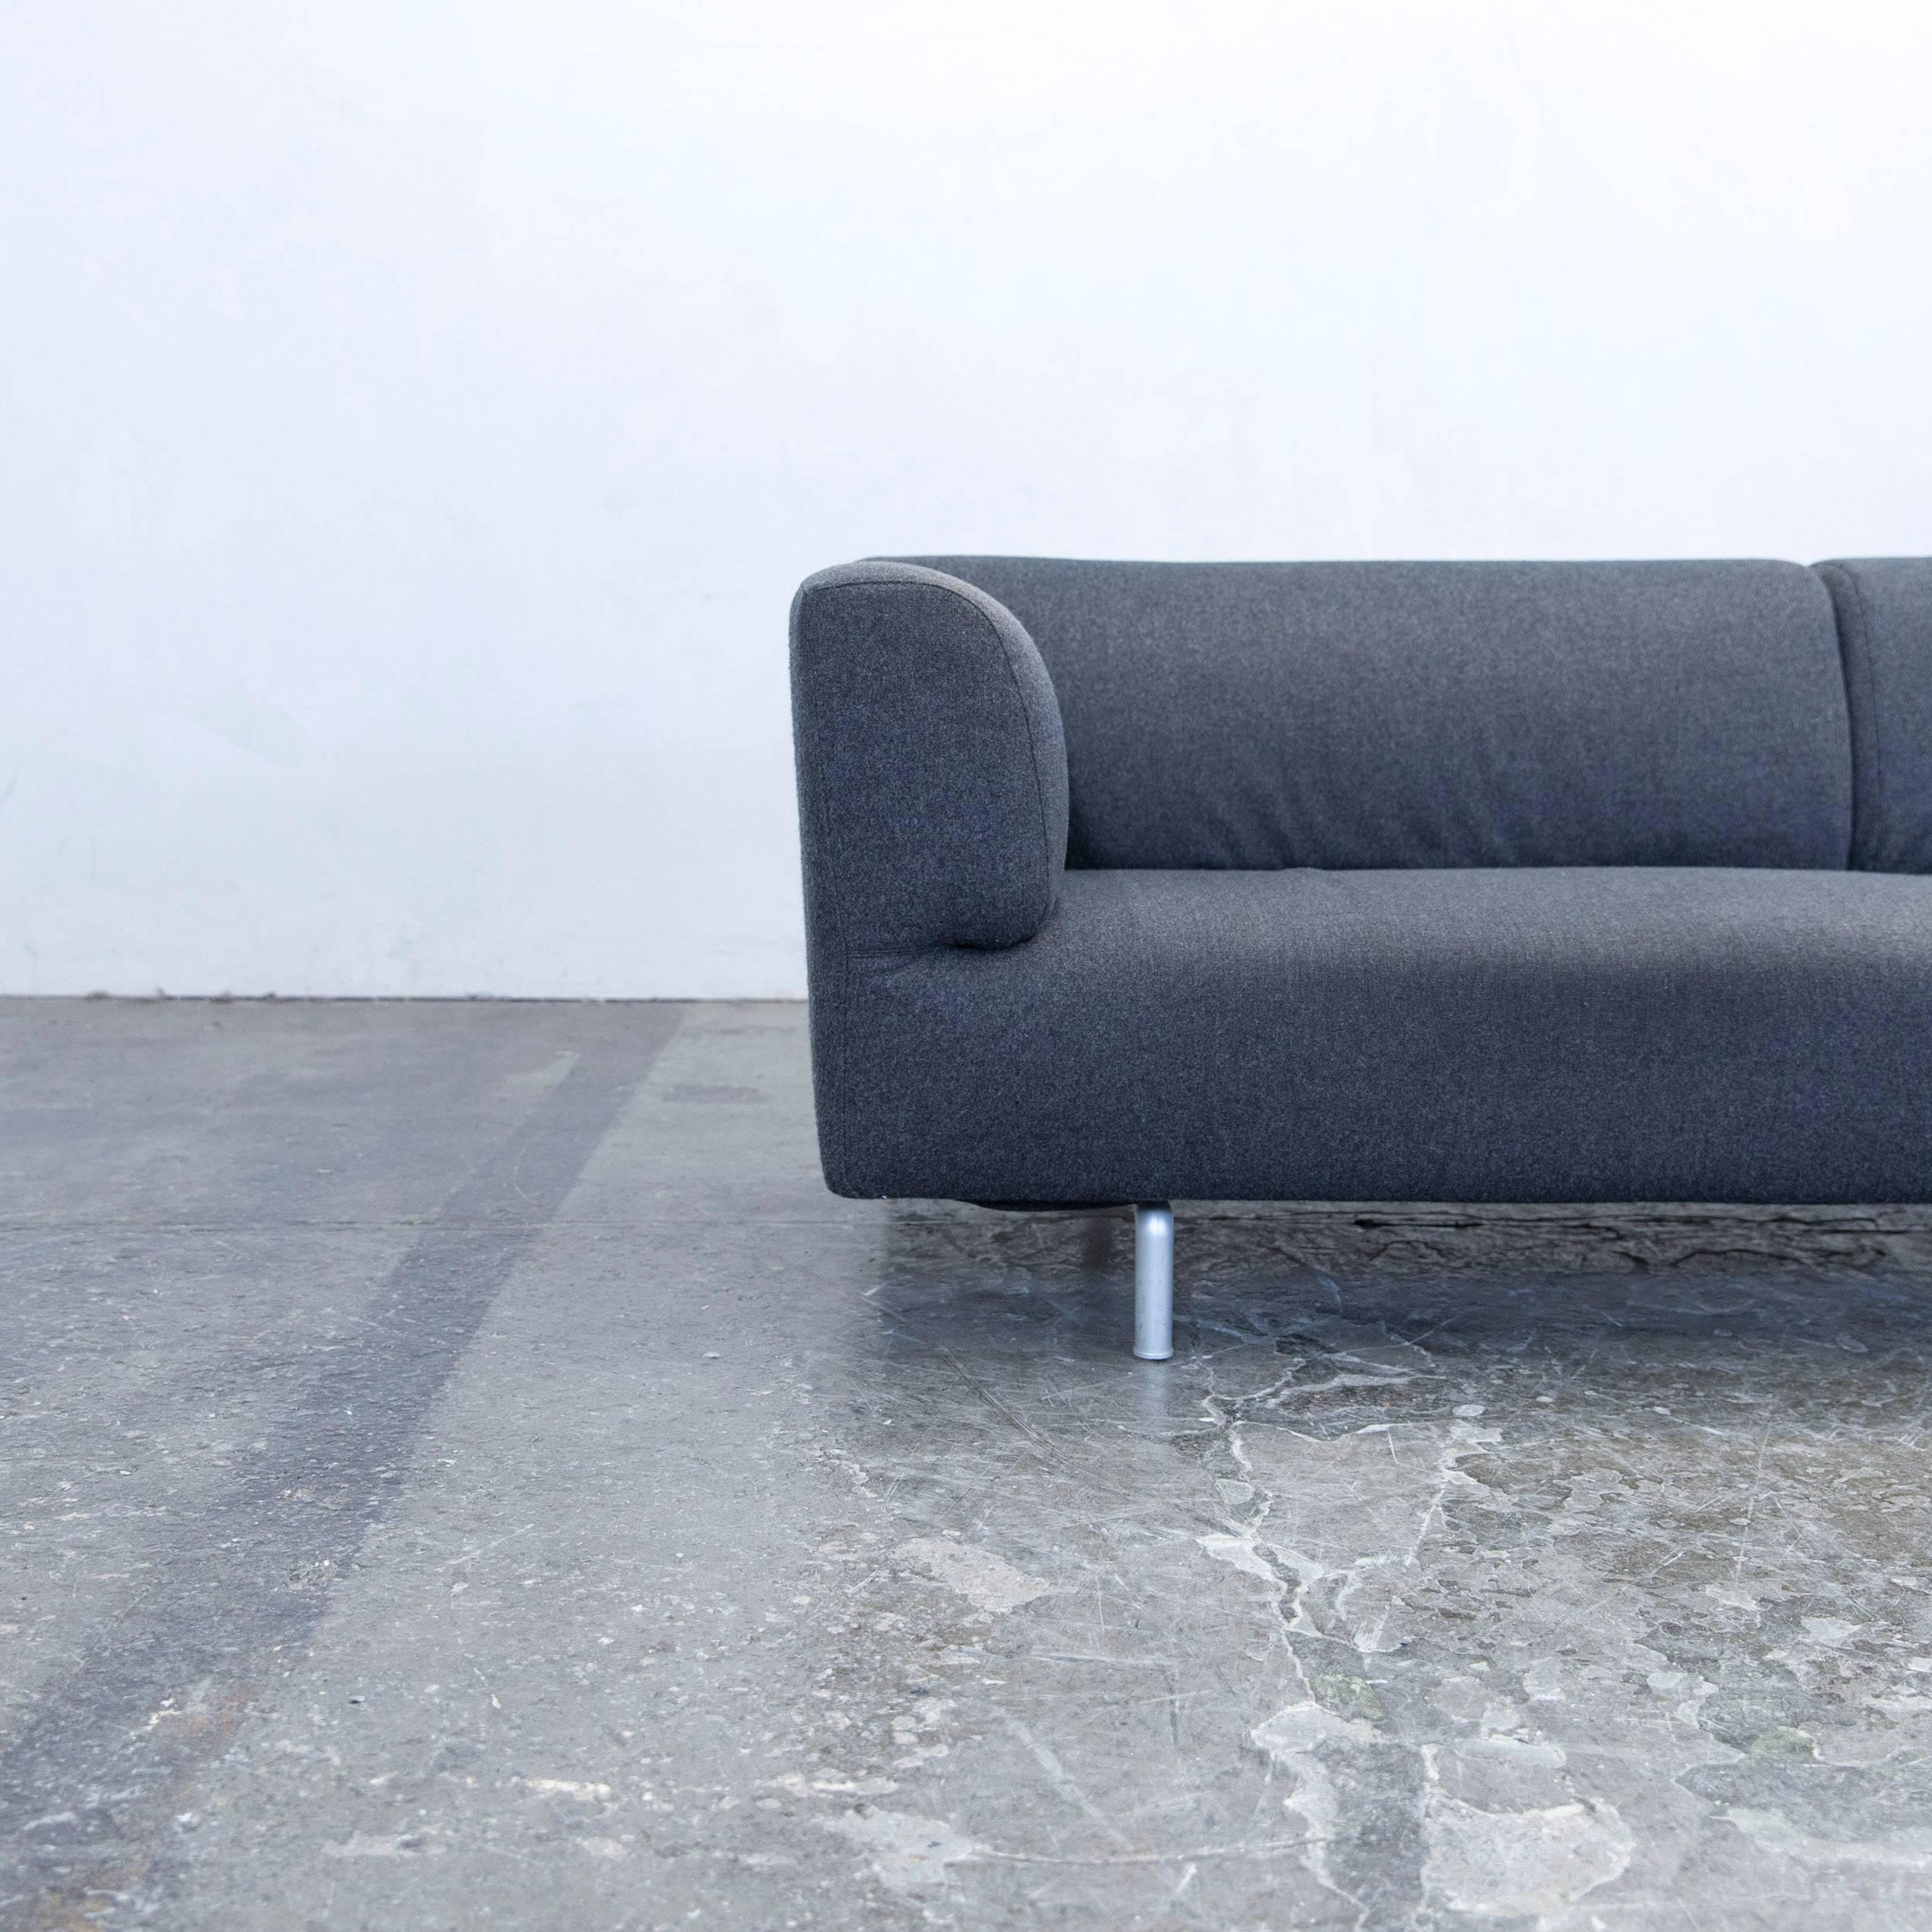 Anthrazit grey colored original Cassina Met designer sofa, in a minimalistic and modern design, made for pure comfort and style.